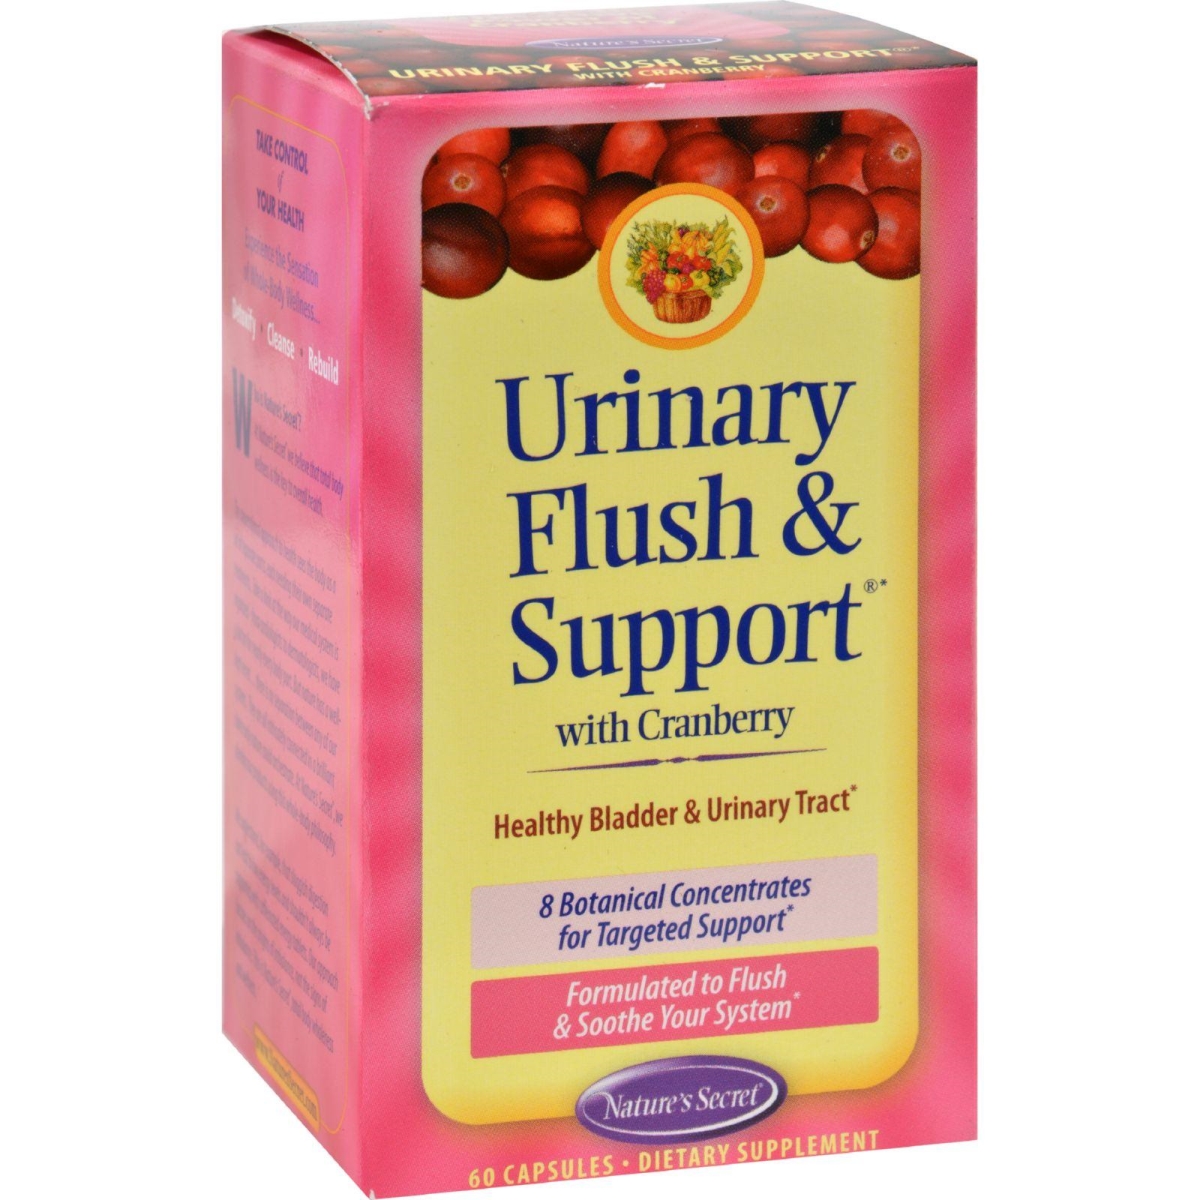 Hg0944728 Urinary Cleans & Flush With Cranberry Extract - 60 Capsules